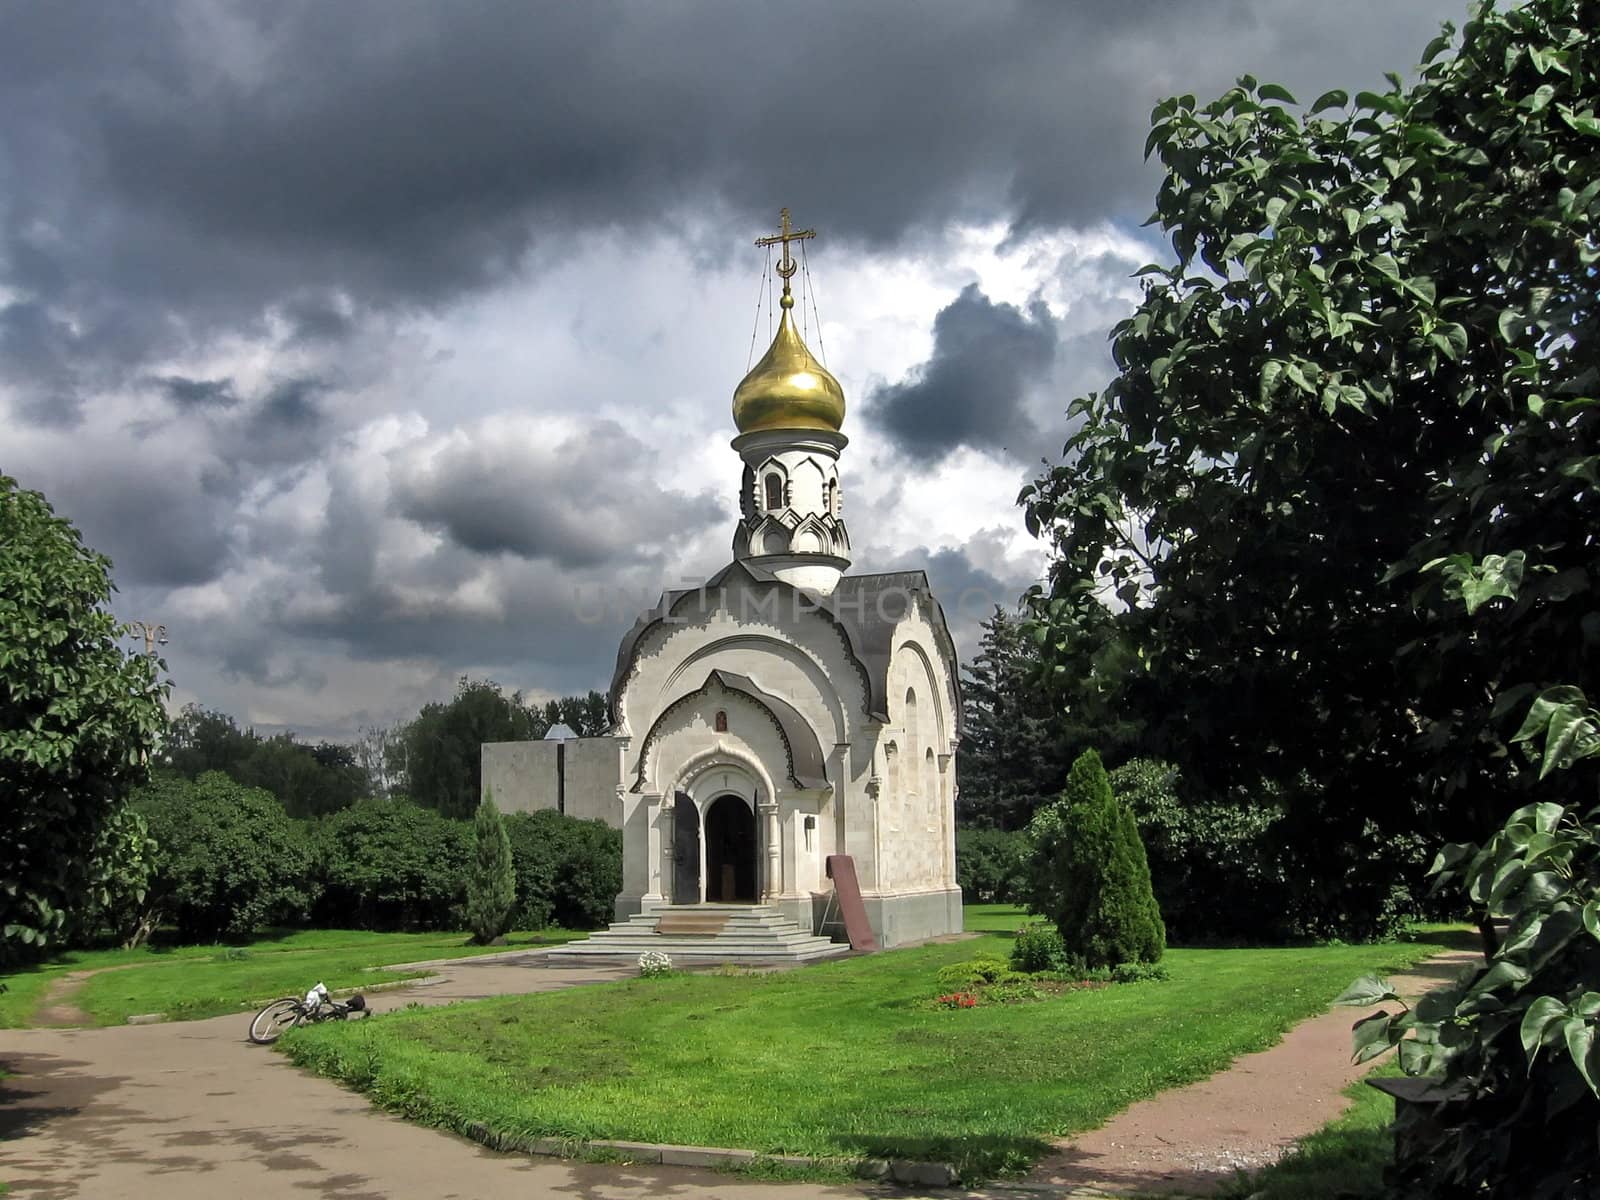 Small Russian church on a background of thunder clouds